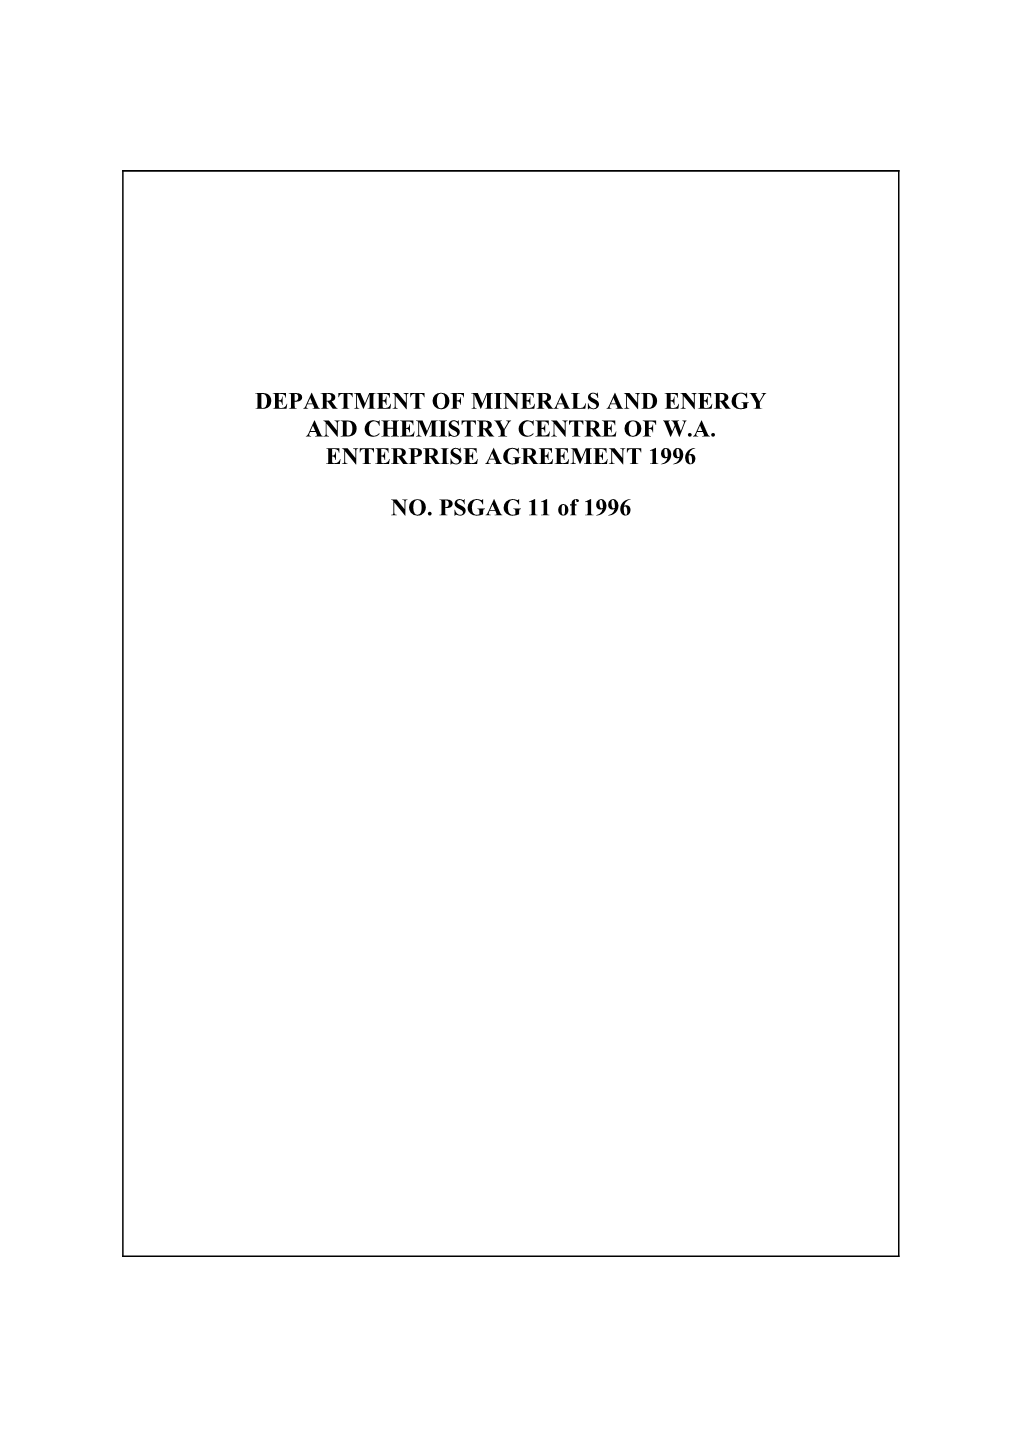 Department of Minerals and Energy and Chemistry Centre of W.A. Enterprise Agreement 1996